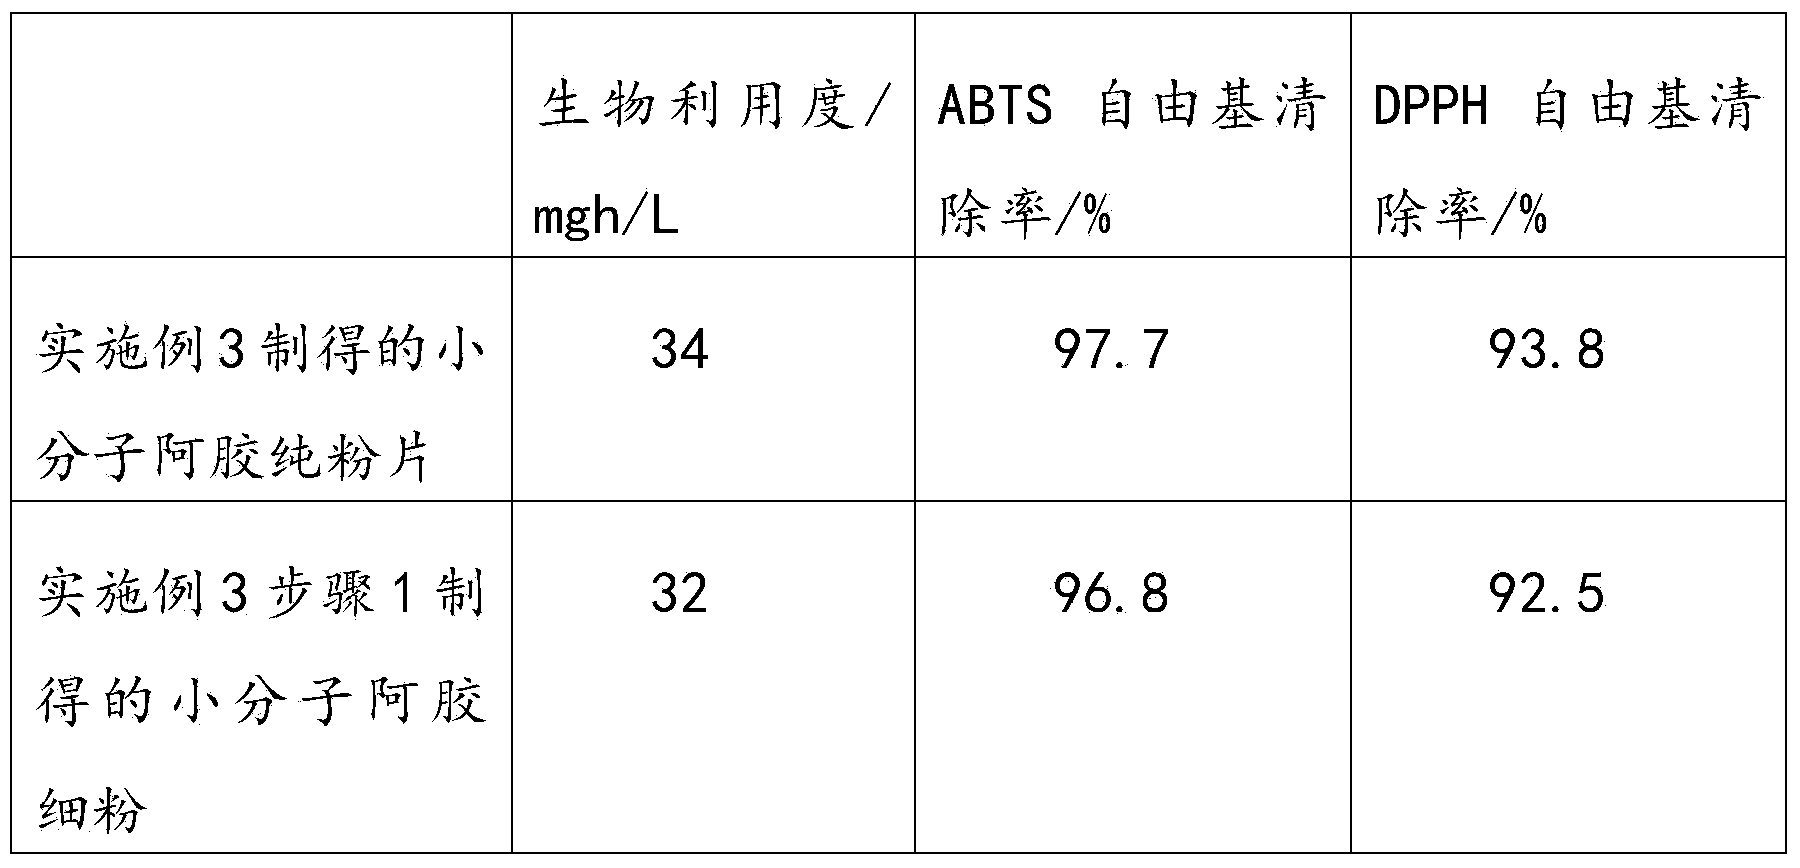 Small molecular donkey-hide gelatin pure powder tablet and preparation method thereof